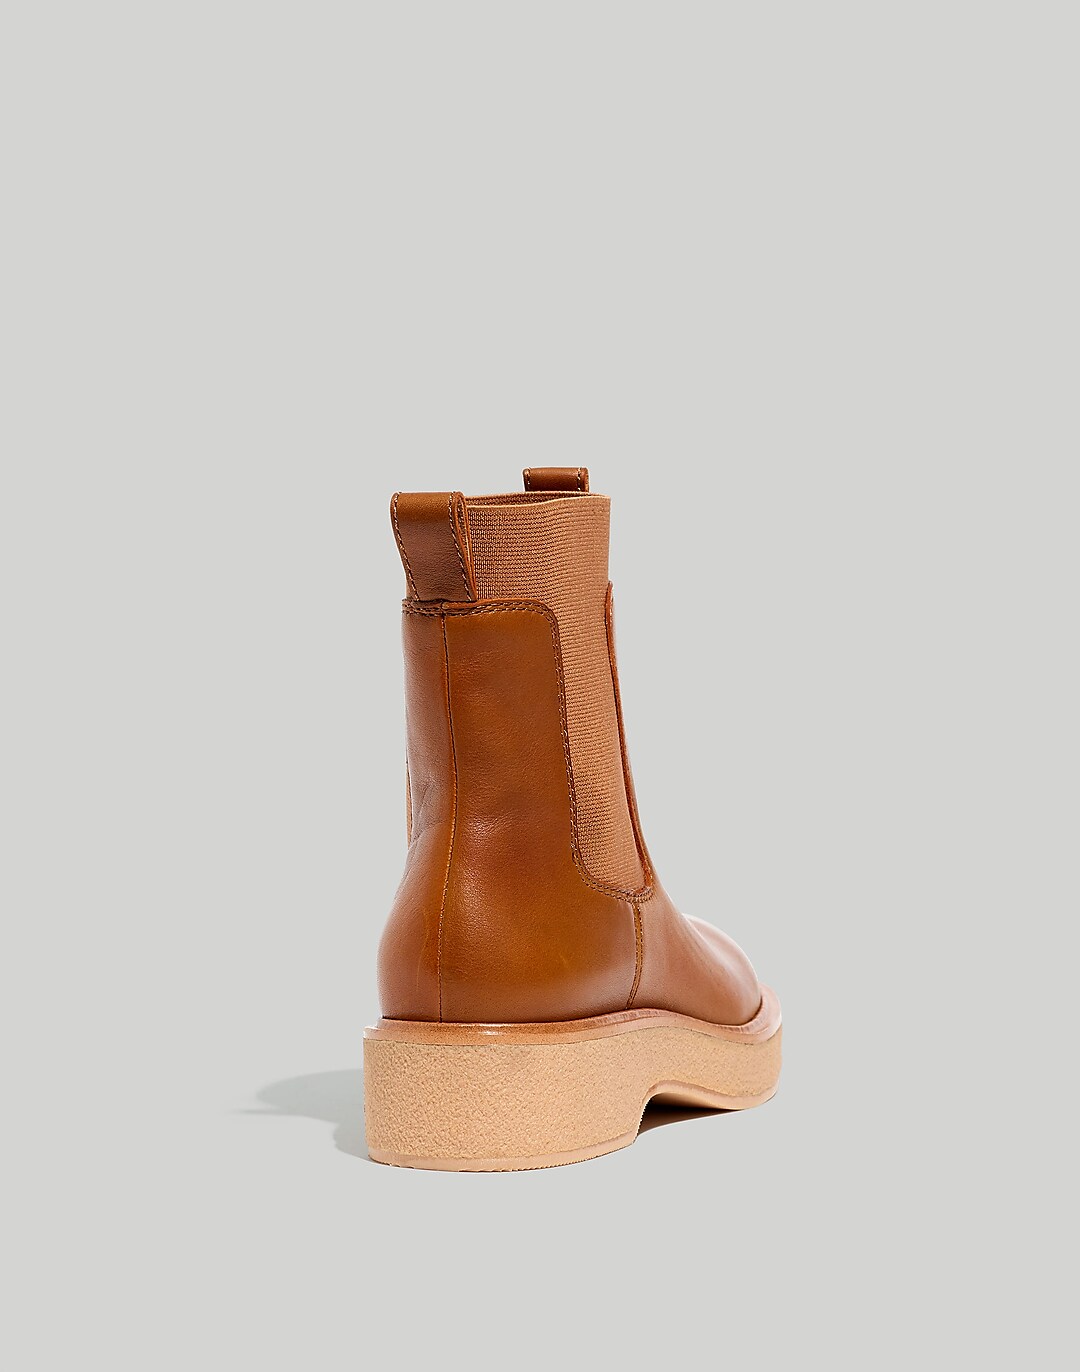 The Camryn Chelsea Boot in Leather